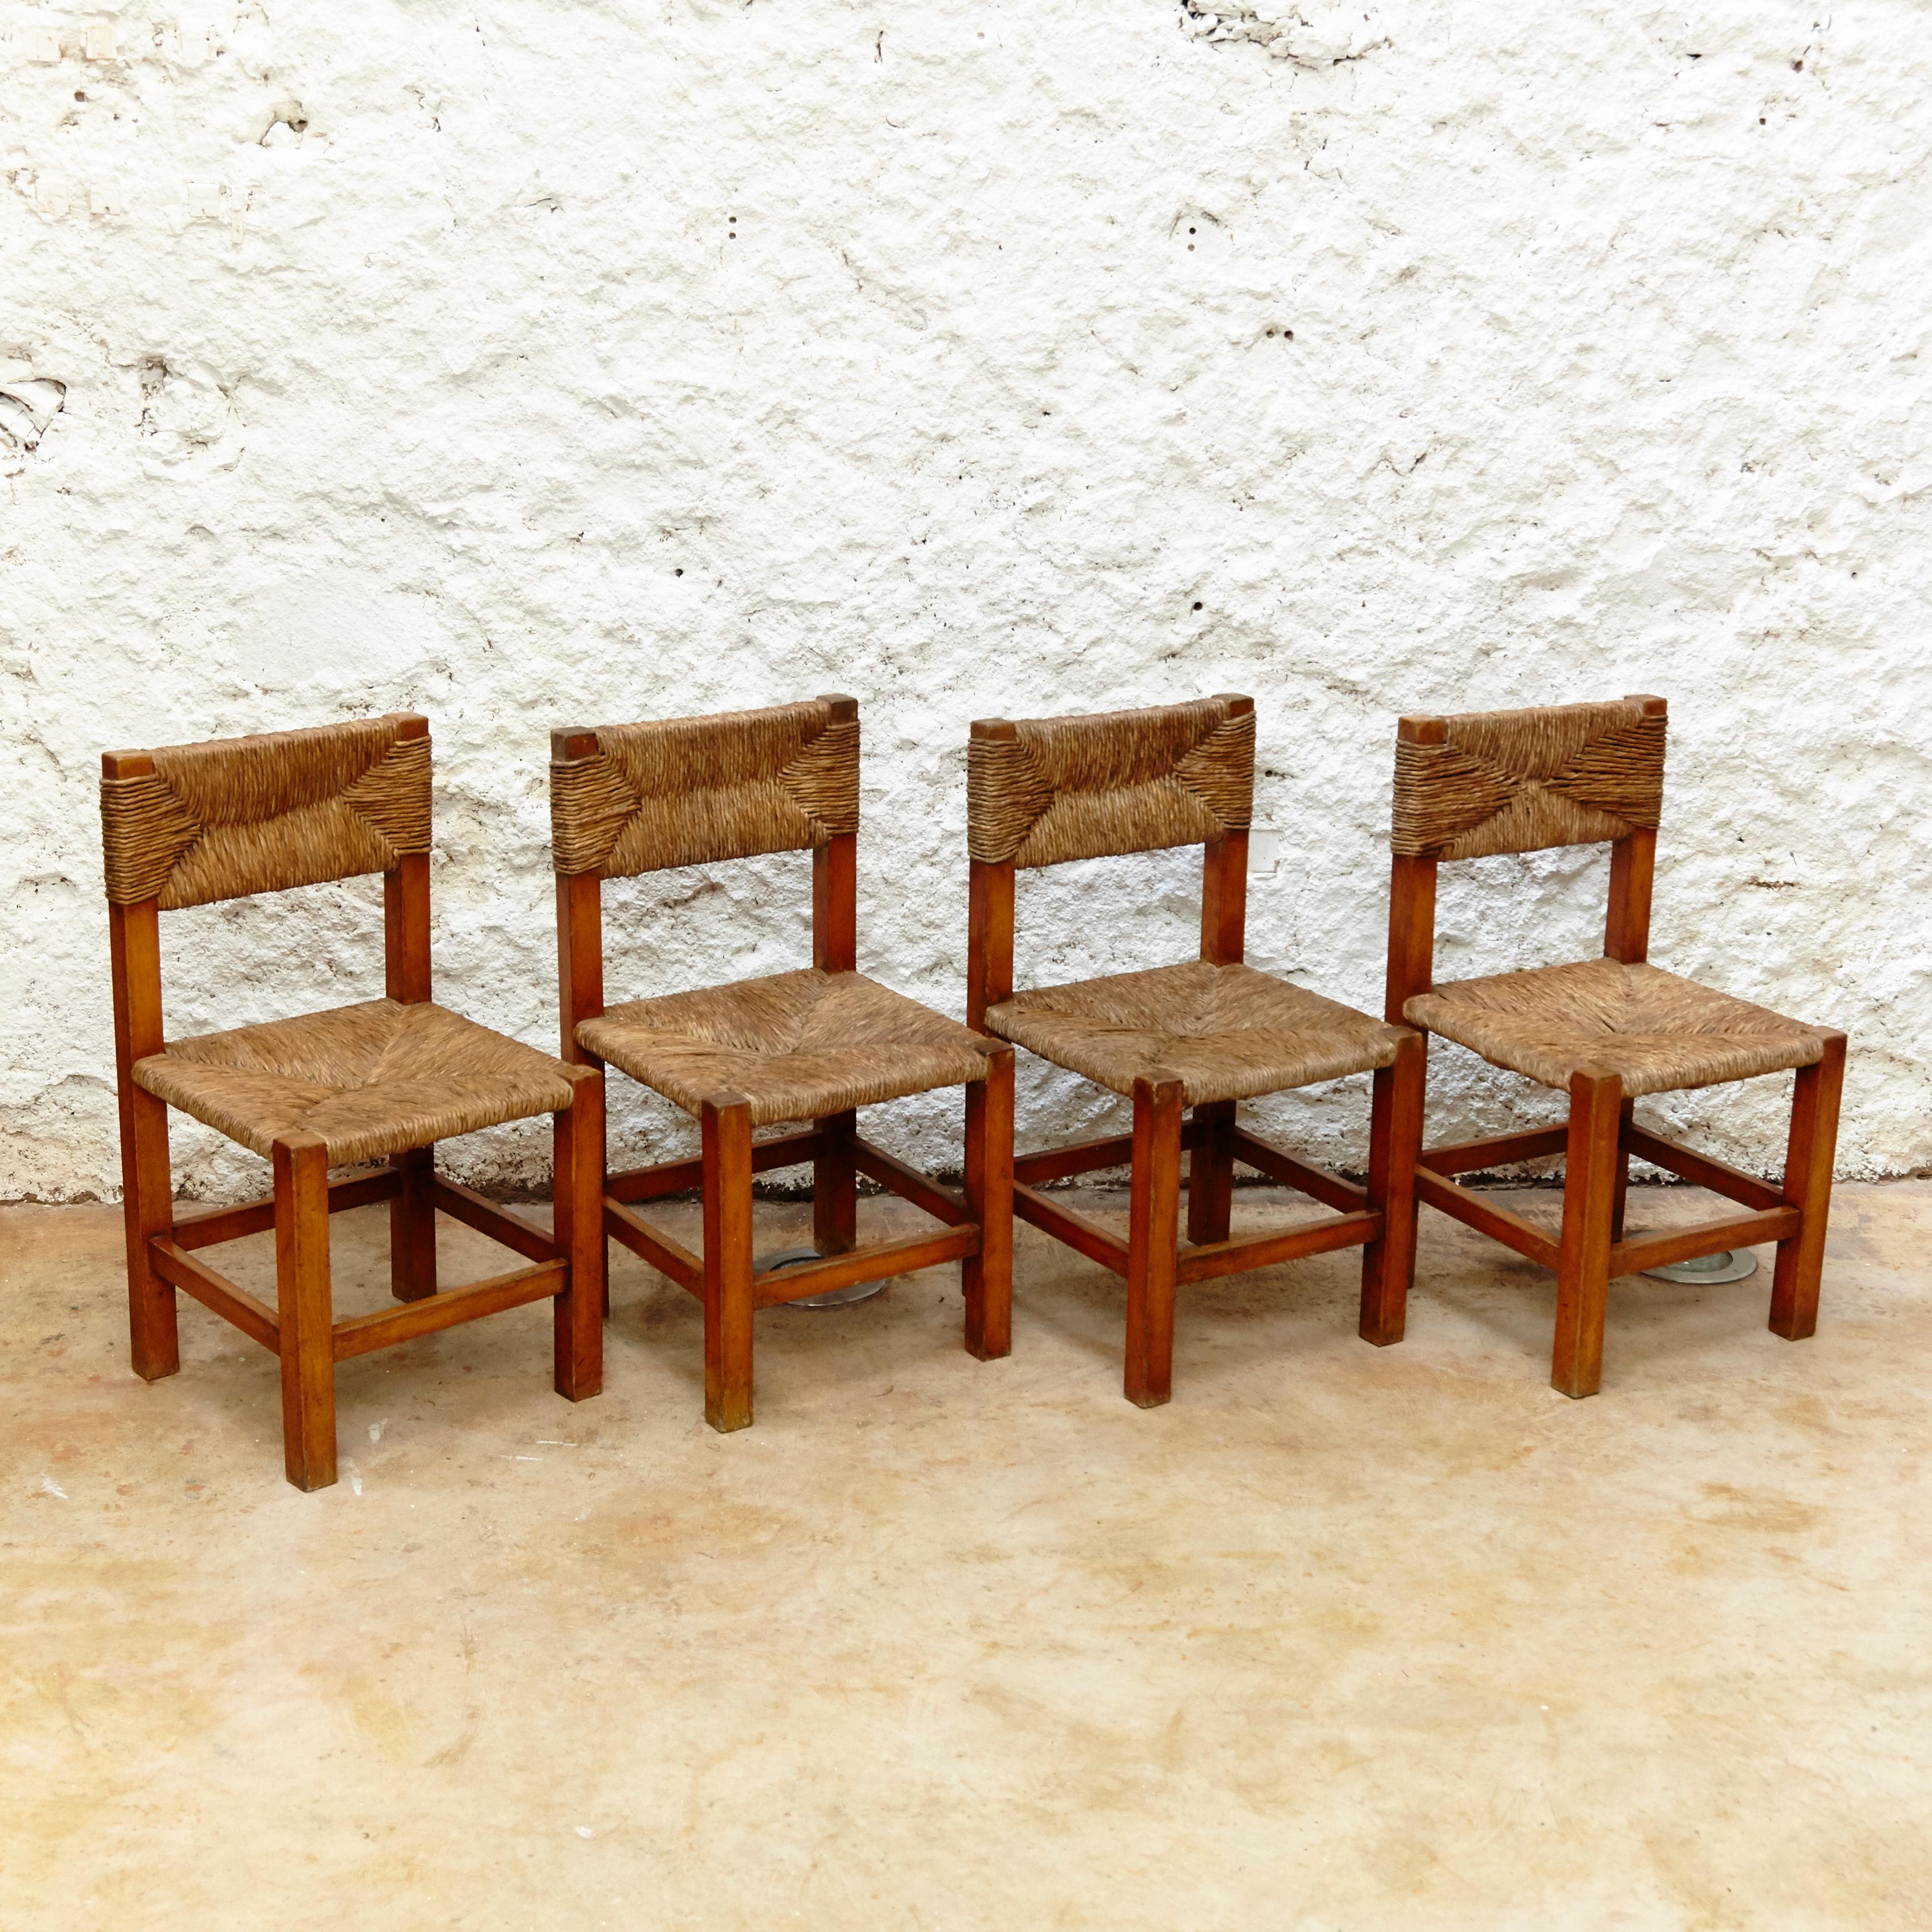 Chairs designed in the style of Charlotte Perriand, made by unknown manufacturer.

Wood and rattan.

In original condition, with minor wear consistent with age and use, preserving a beautiful patina.

Charlotte Perriand (1903-1999) she was